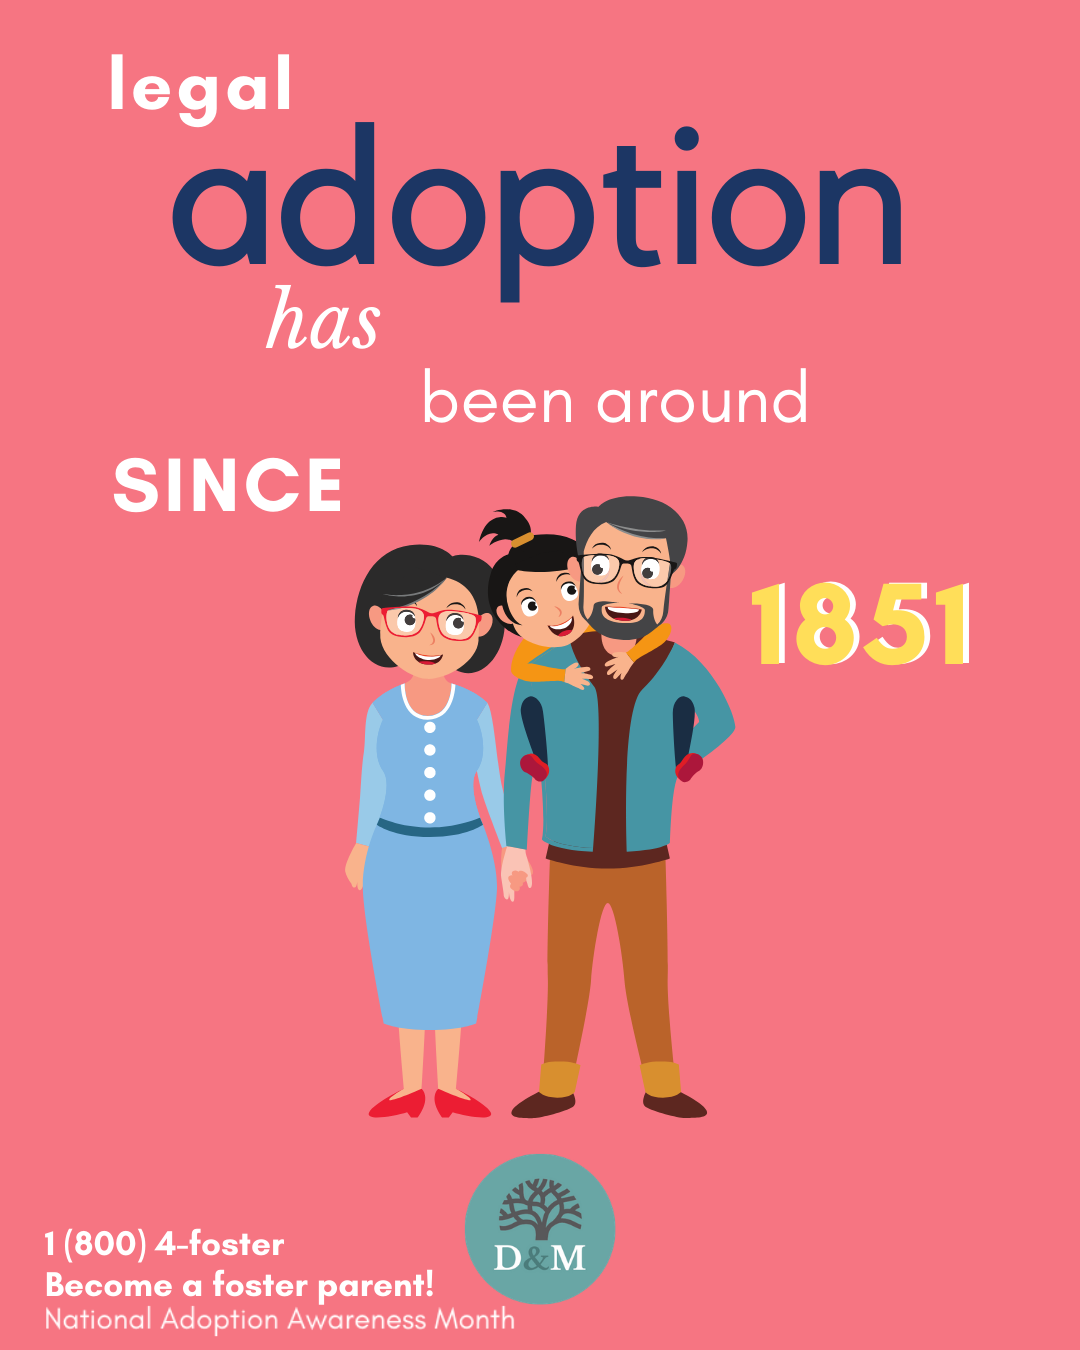 Did you know the first adoption law was passed in Massachusetts in 1851?